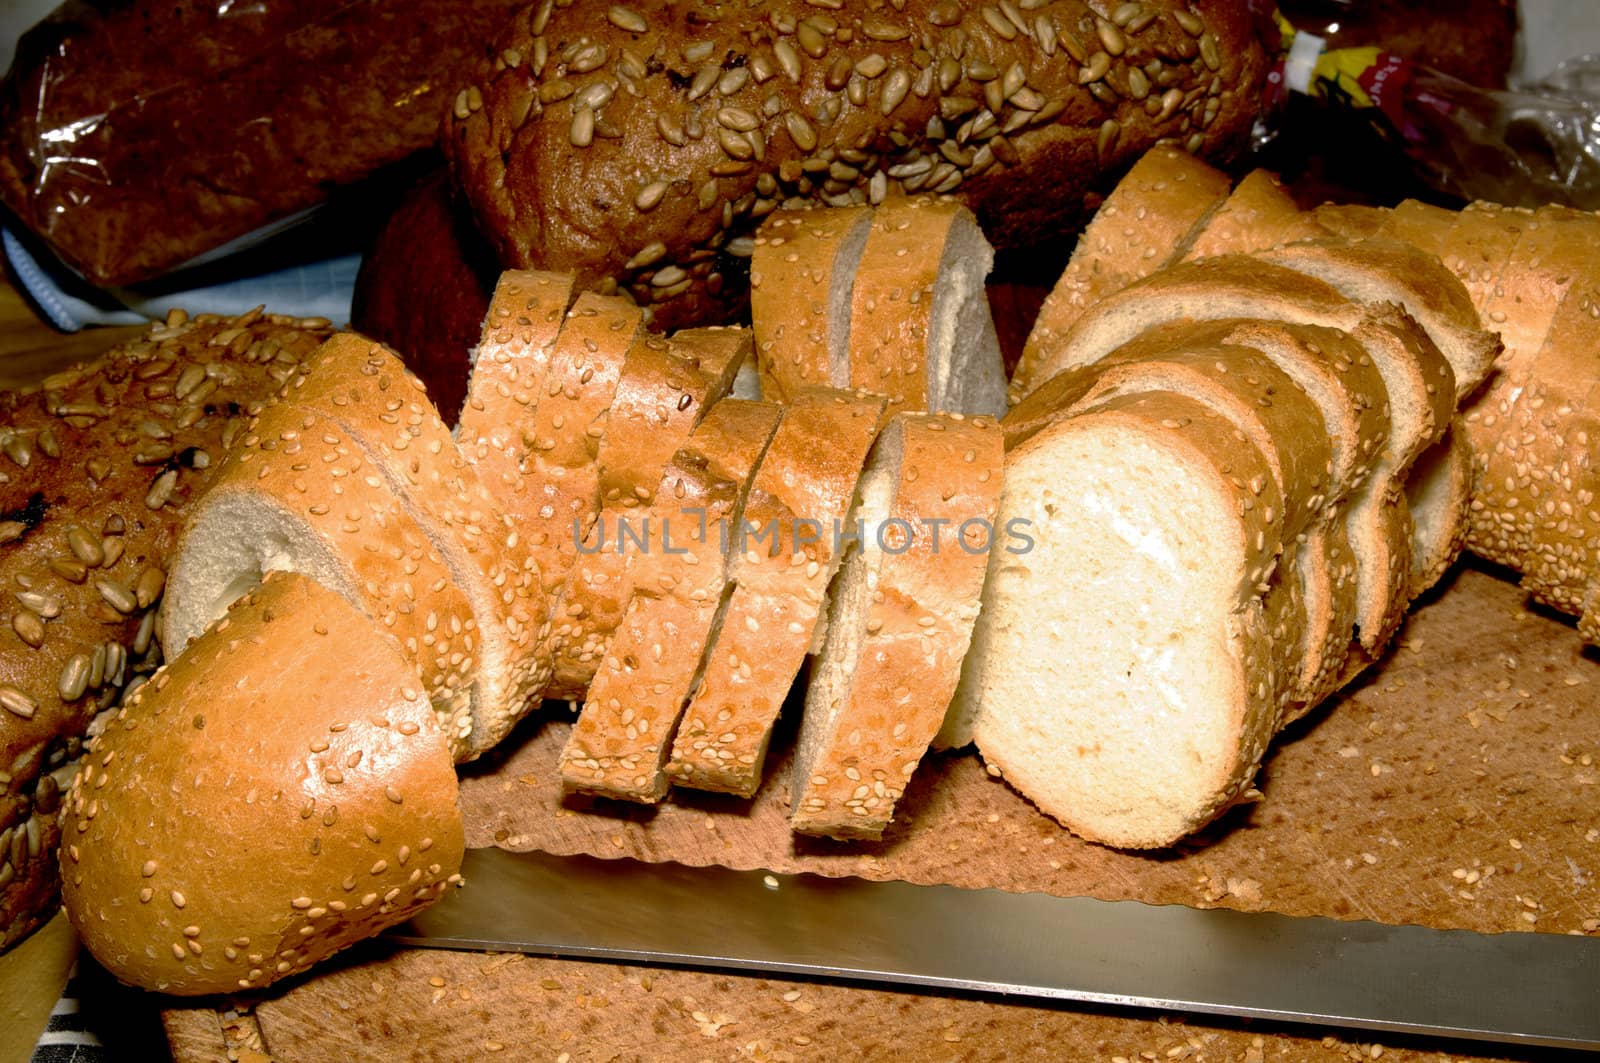 a few pieces of bread and bread and the knife